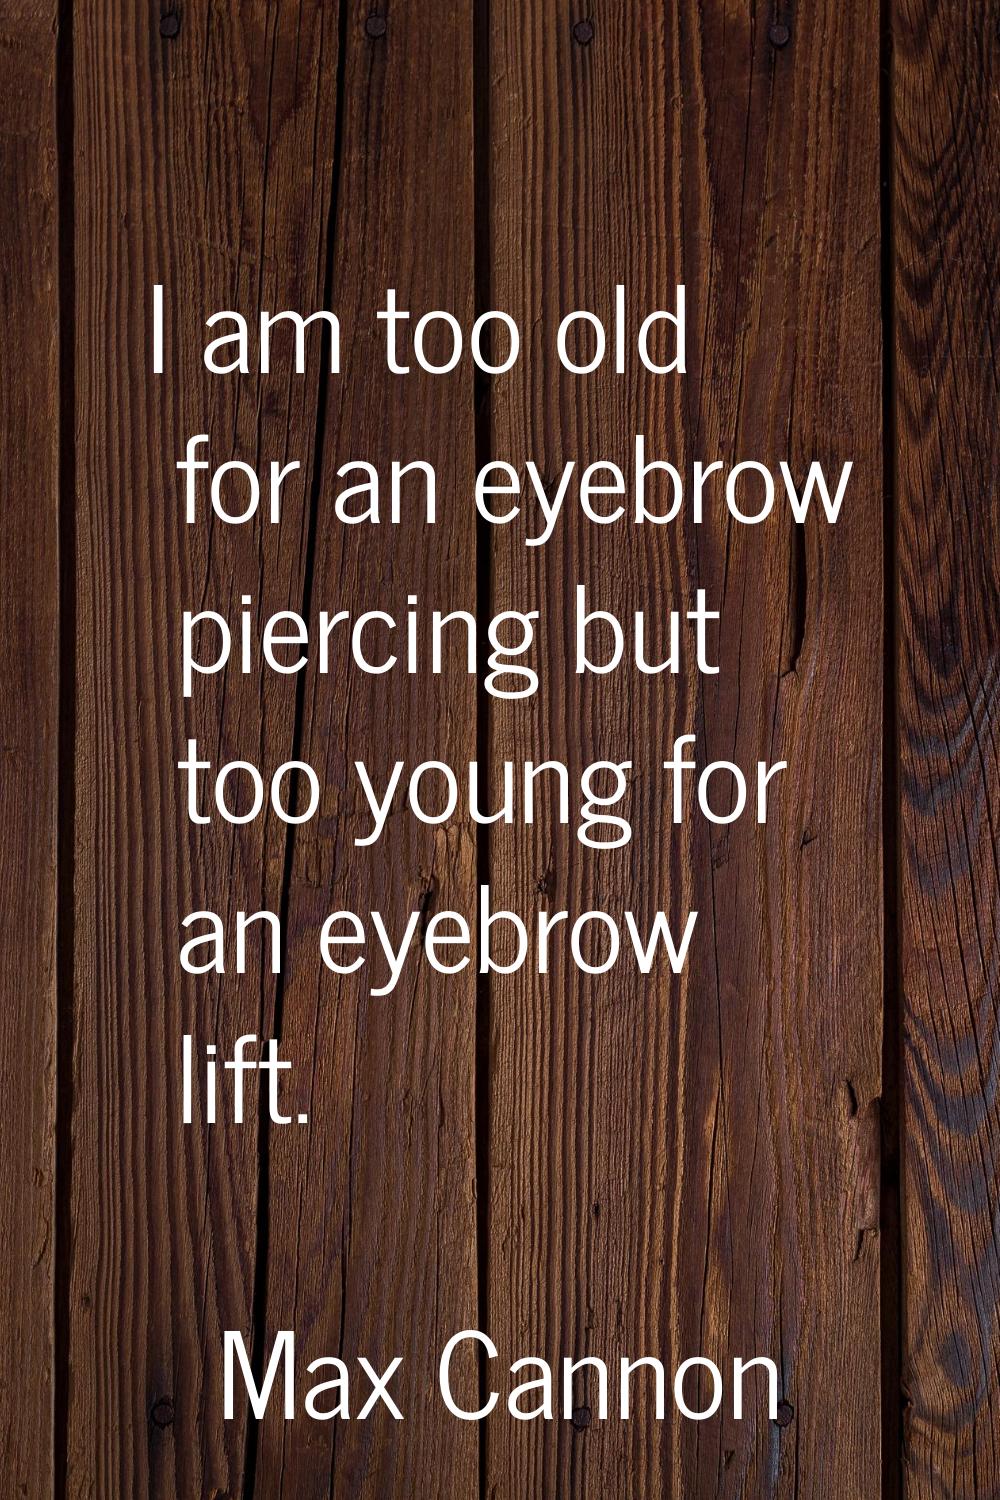 I am too old for an eyebrow piercing but too young for an eyebrow lift.